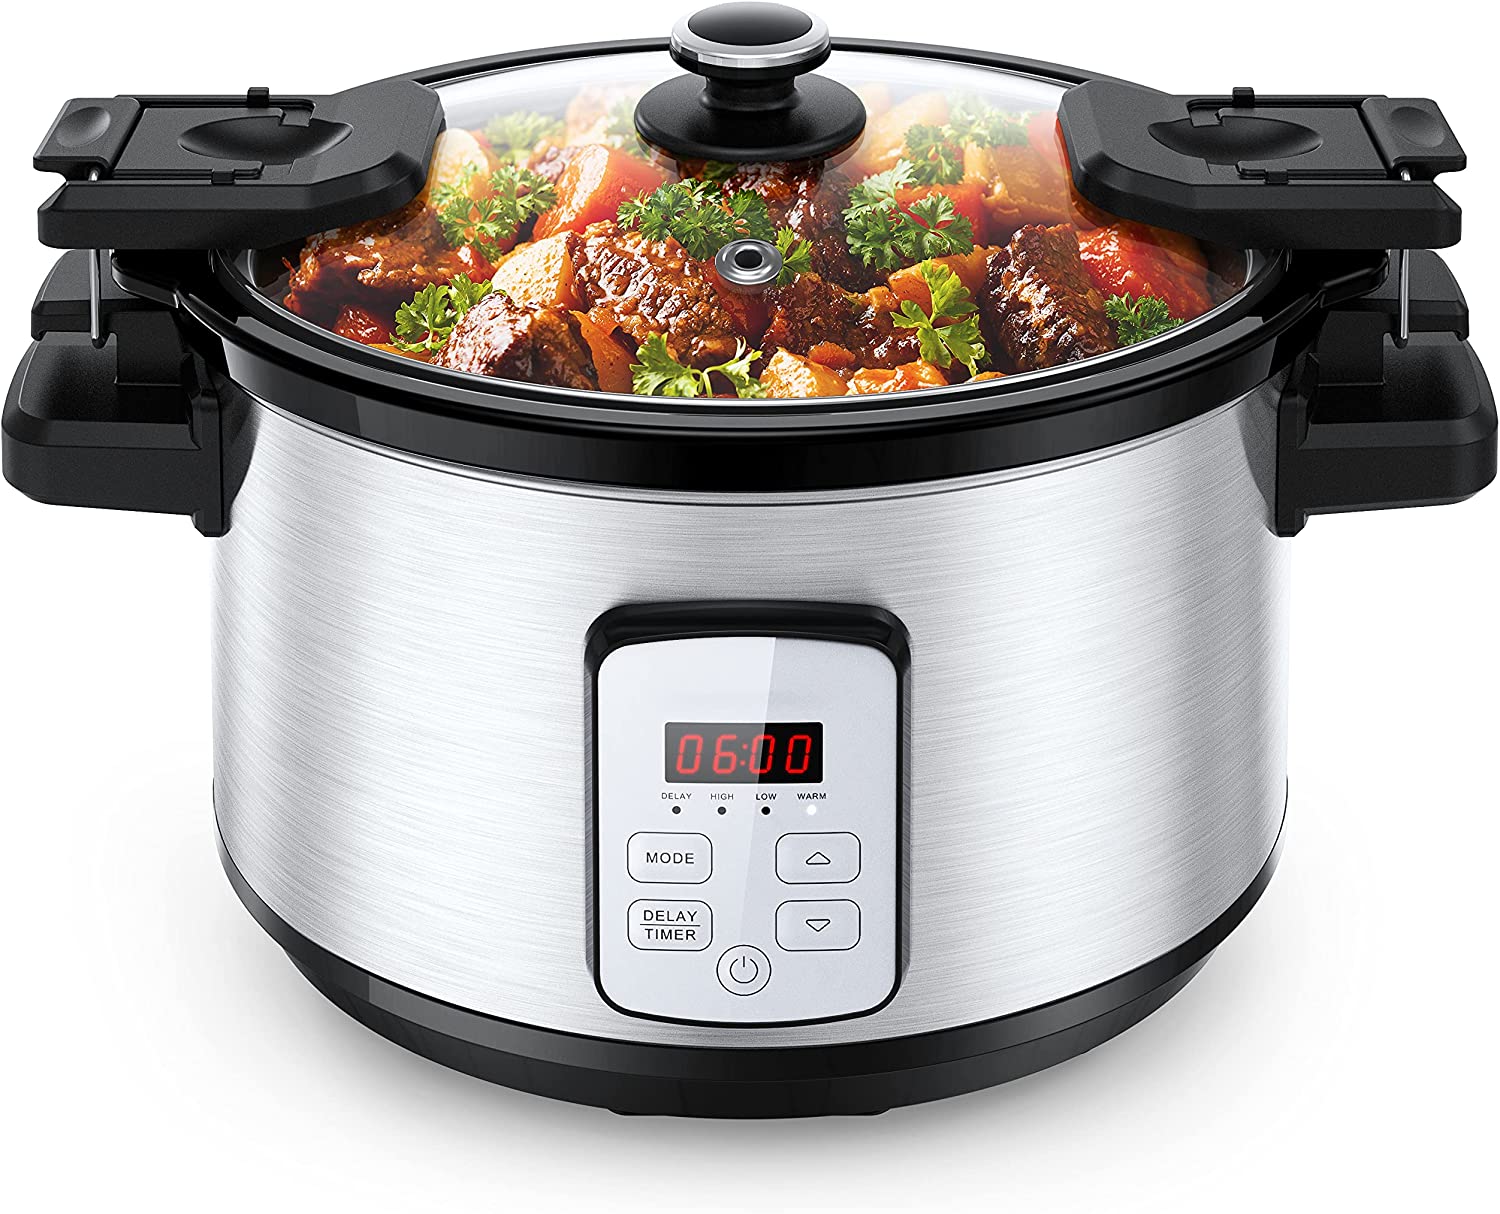 Leuwd 5.3 QT Programmable Stainless Oval Multi-cooker 